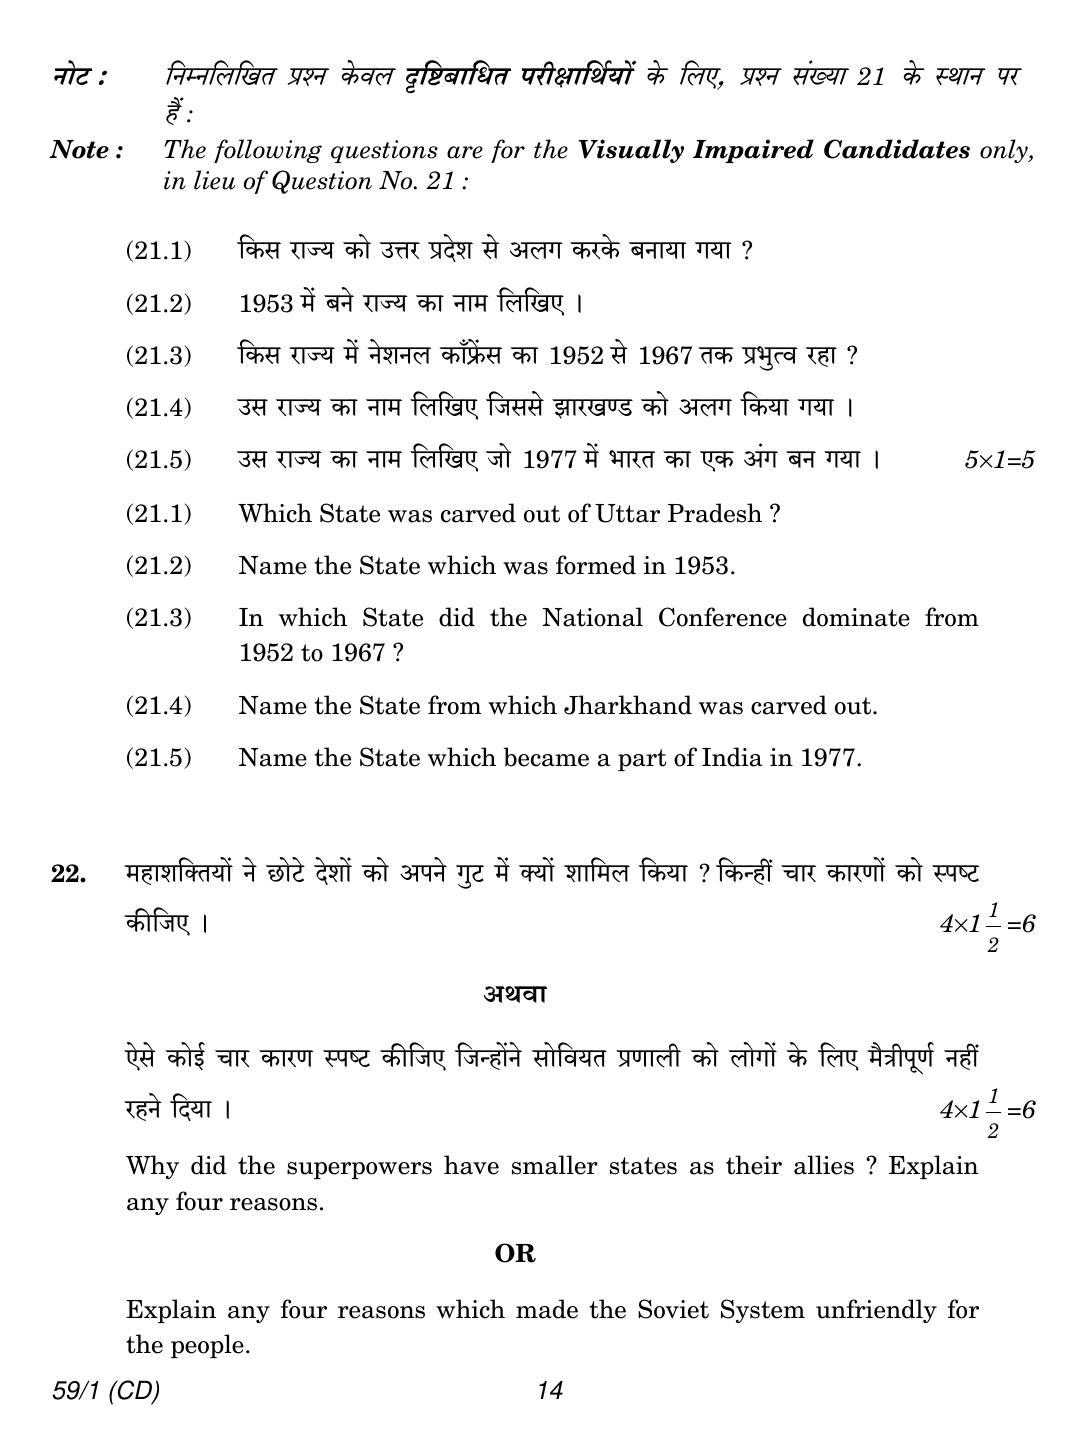 CBSE Class 12 59-1 POLITICAL SCIENCE CD 2018 Question Paper - Page 14